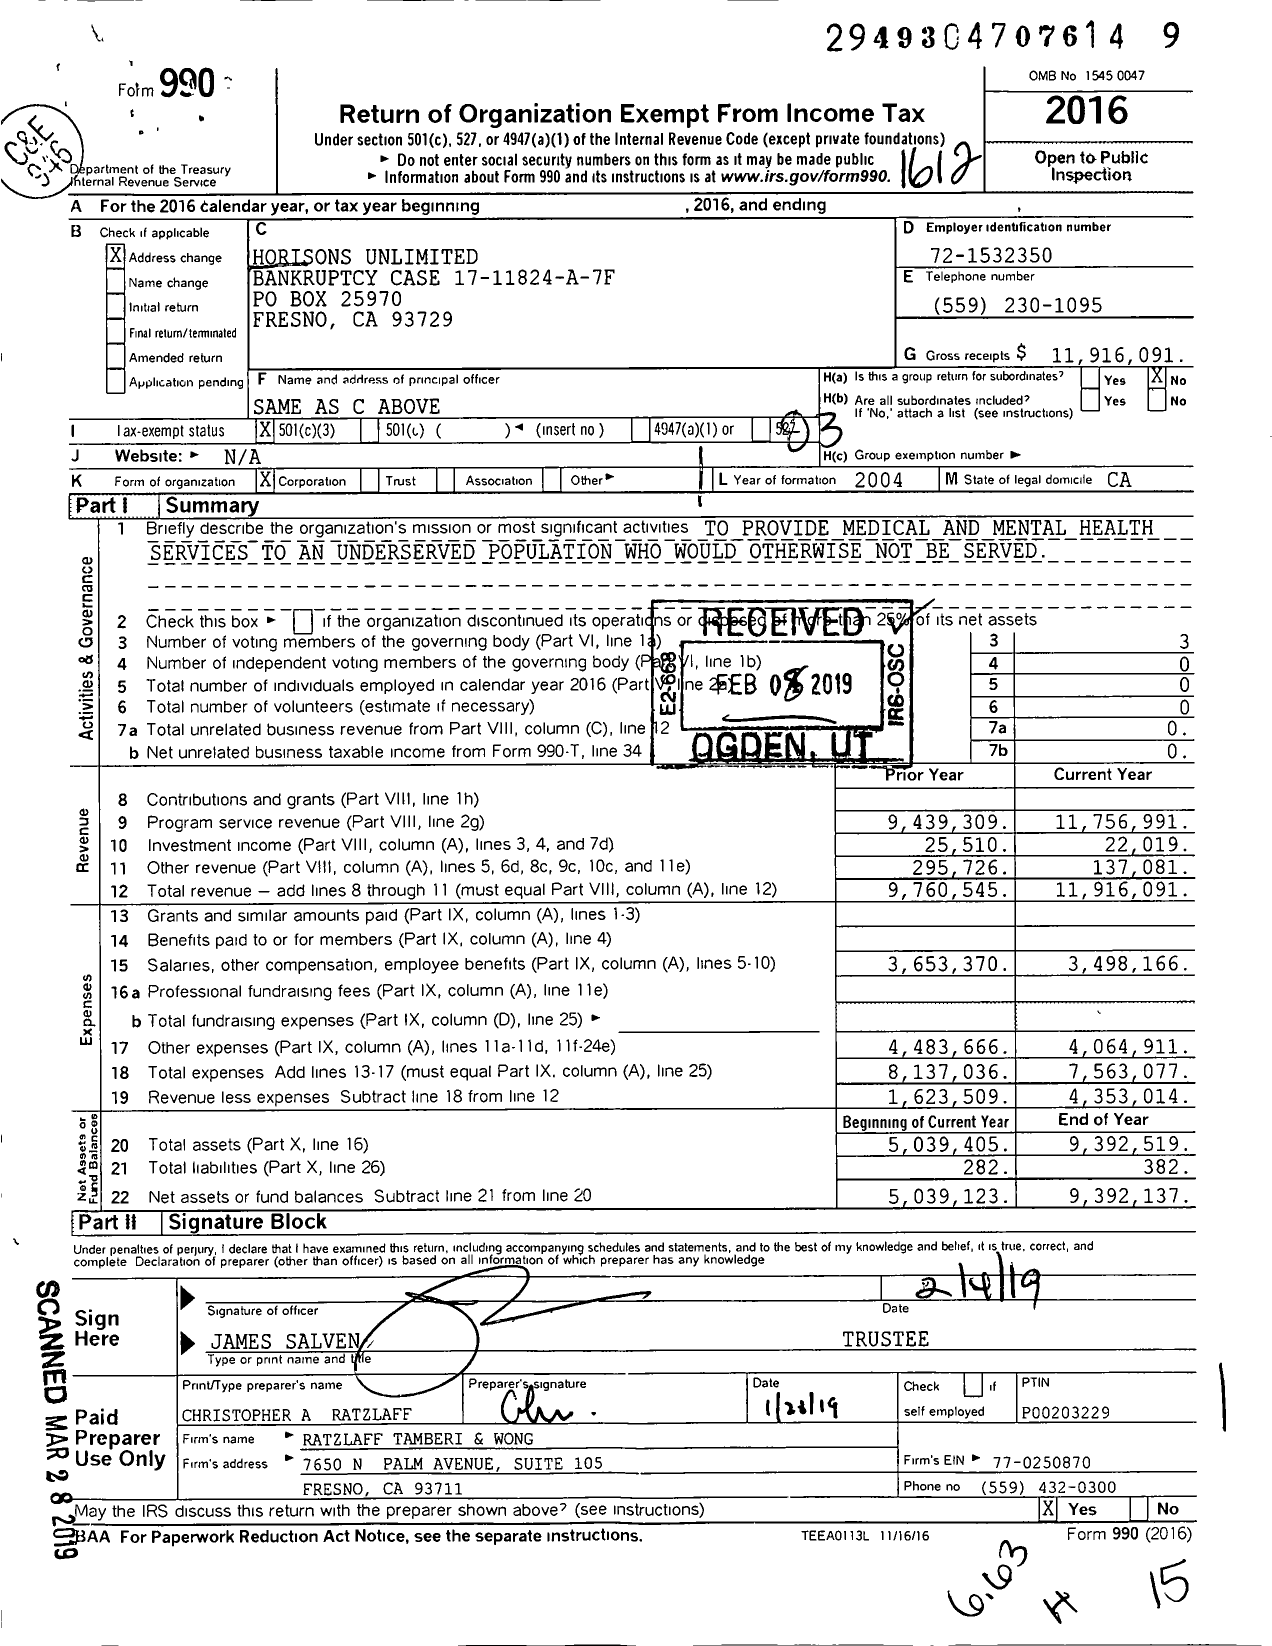 Image of first page of 2016 Form 990 for Horisons Unlimited Bankruptcy Case 17-11824-A-7F